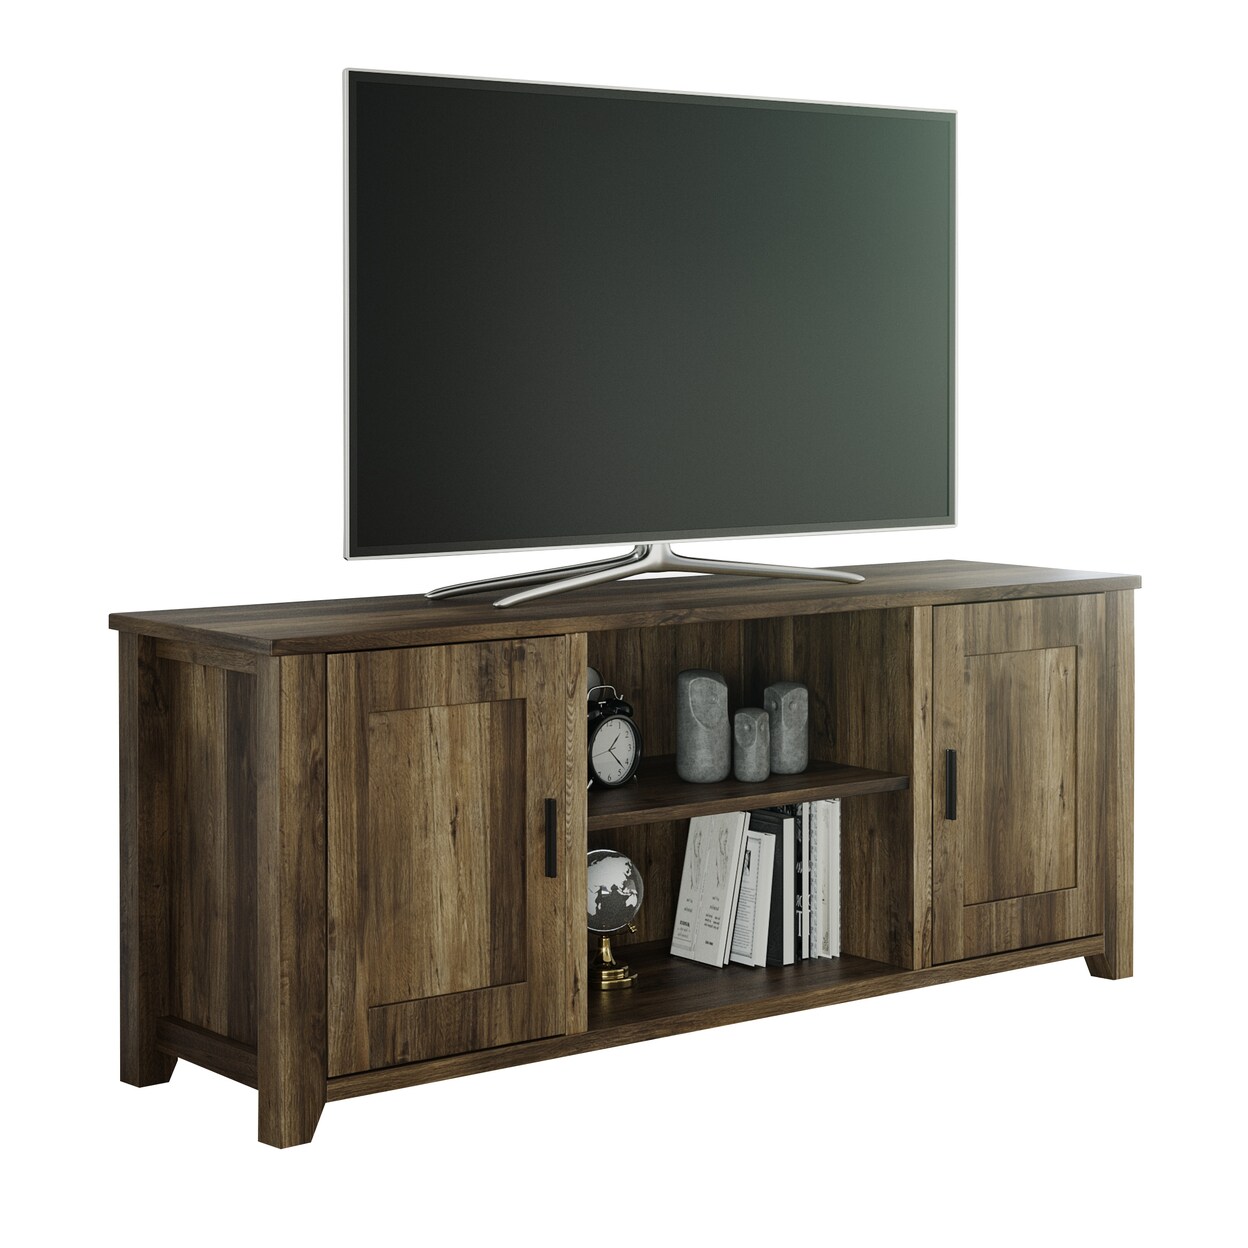 Lavish Home 65 in TV Stand 2 Door Entertainment Adjustable Media Console Shelves Farmhouse Style